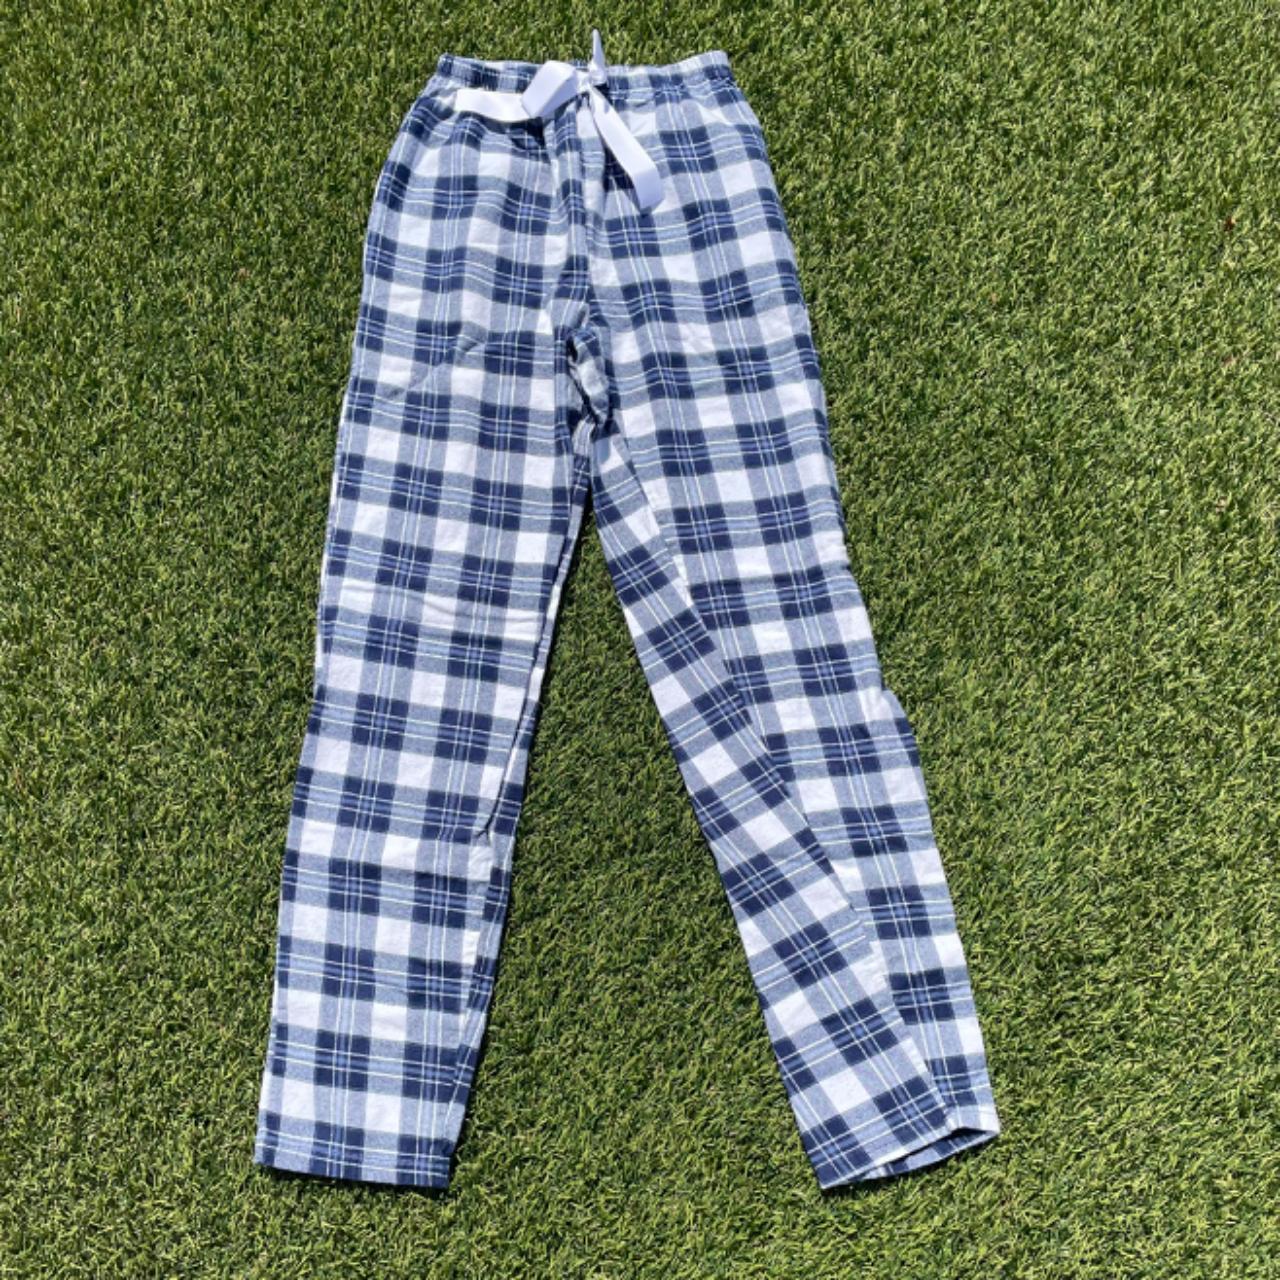 Product Image 1 - Blue Plaid Joggers ☁️

easy to